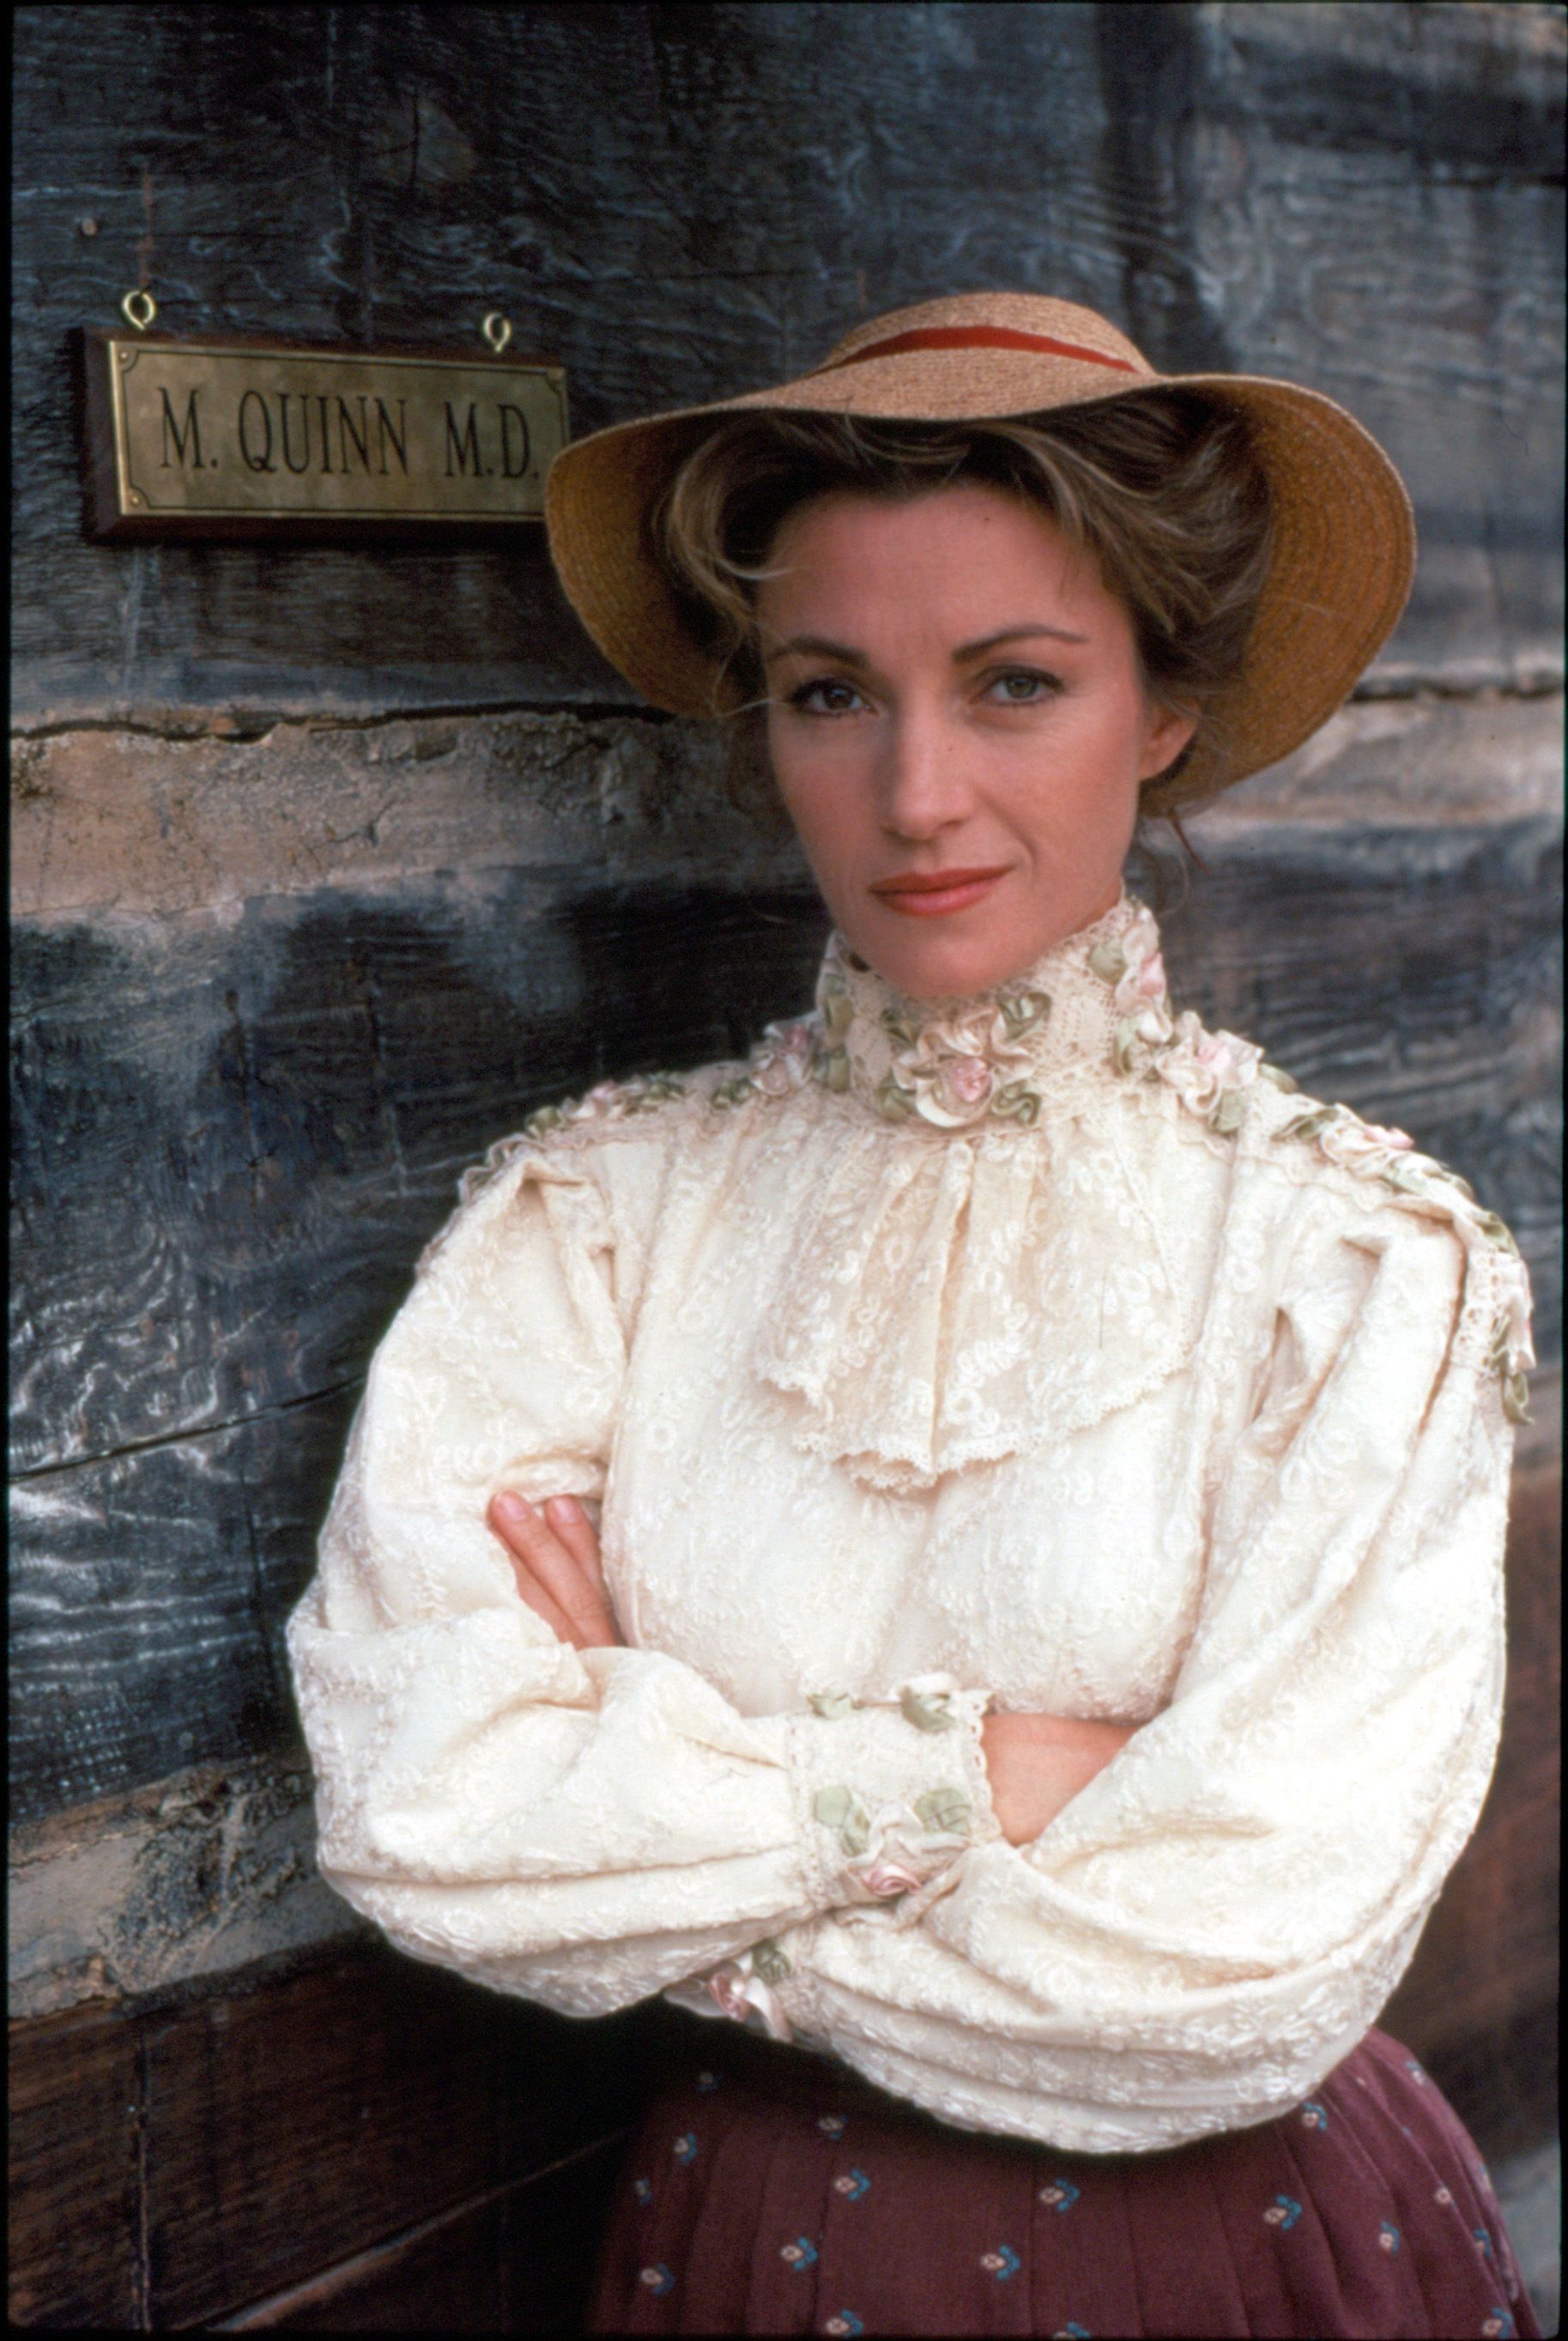 Jane Seymour as Dr. Michaela "Mike" Quinn, for the television series "Dr. Quinn, Medicine Woman" in 1992. | Source: Bob Greene/CBS Photo Archive/Getty Images